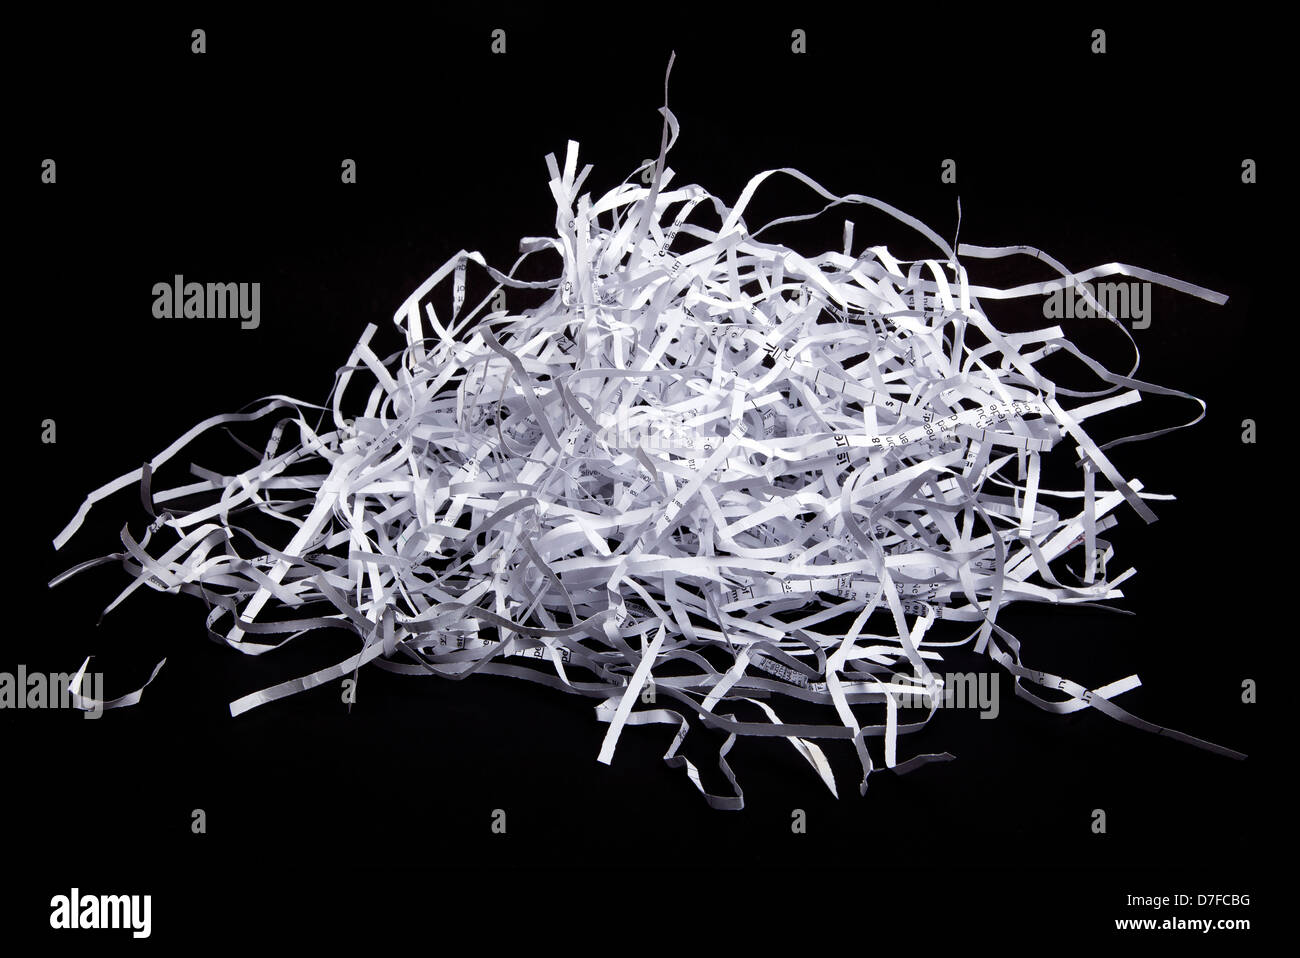 Shredded paper scraps isolated on black background. Stock Photo